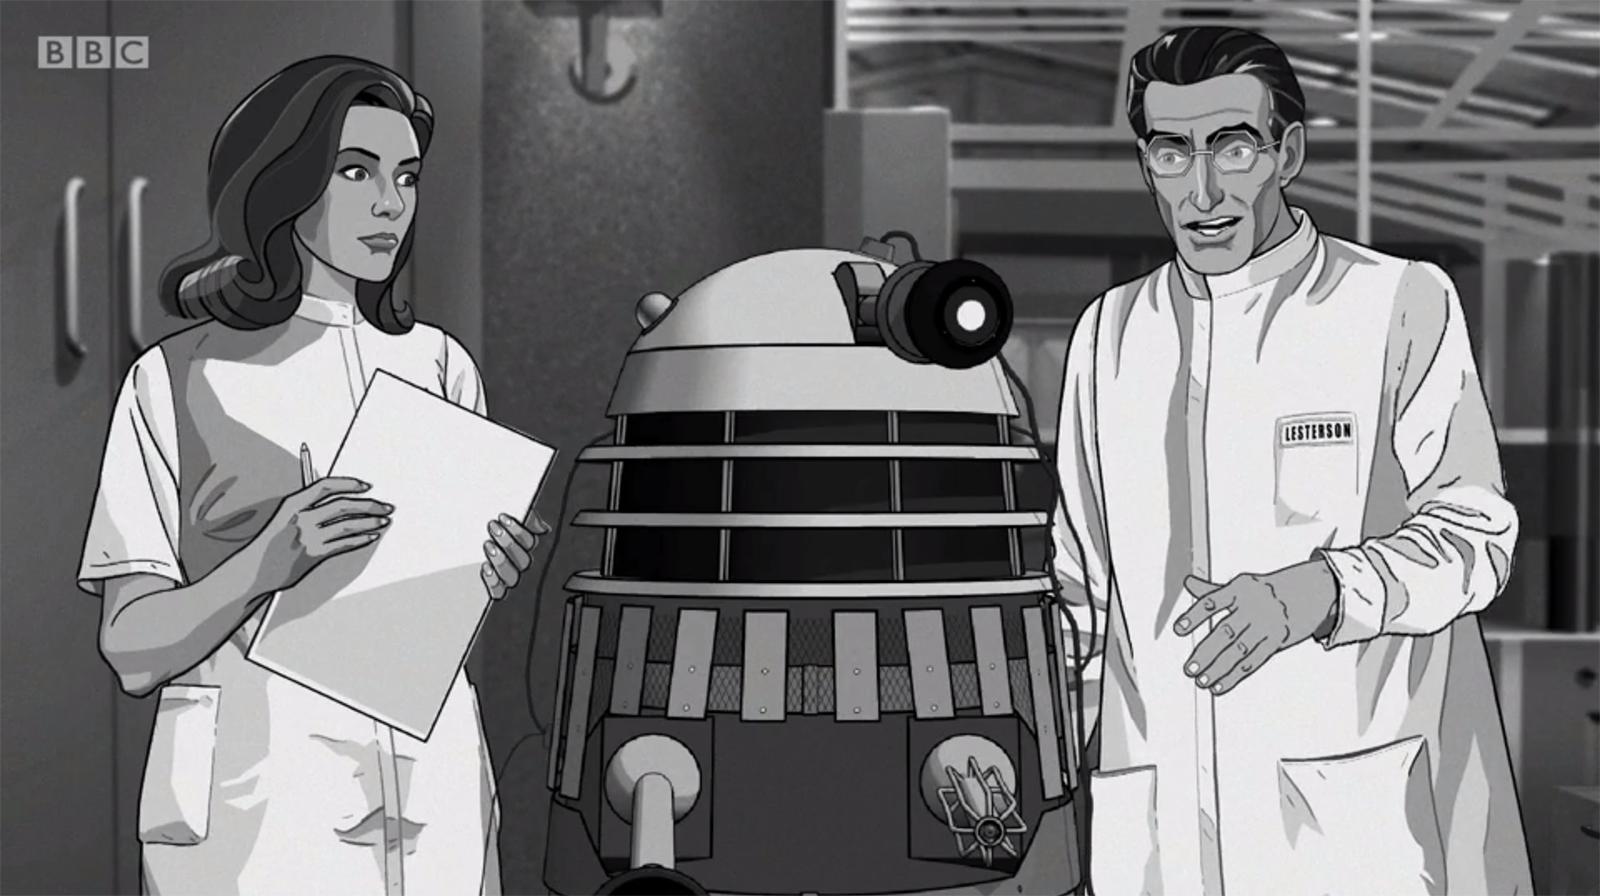 Janley and Lesterson in the animated ‘Power of the Daleks’